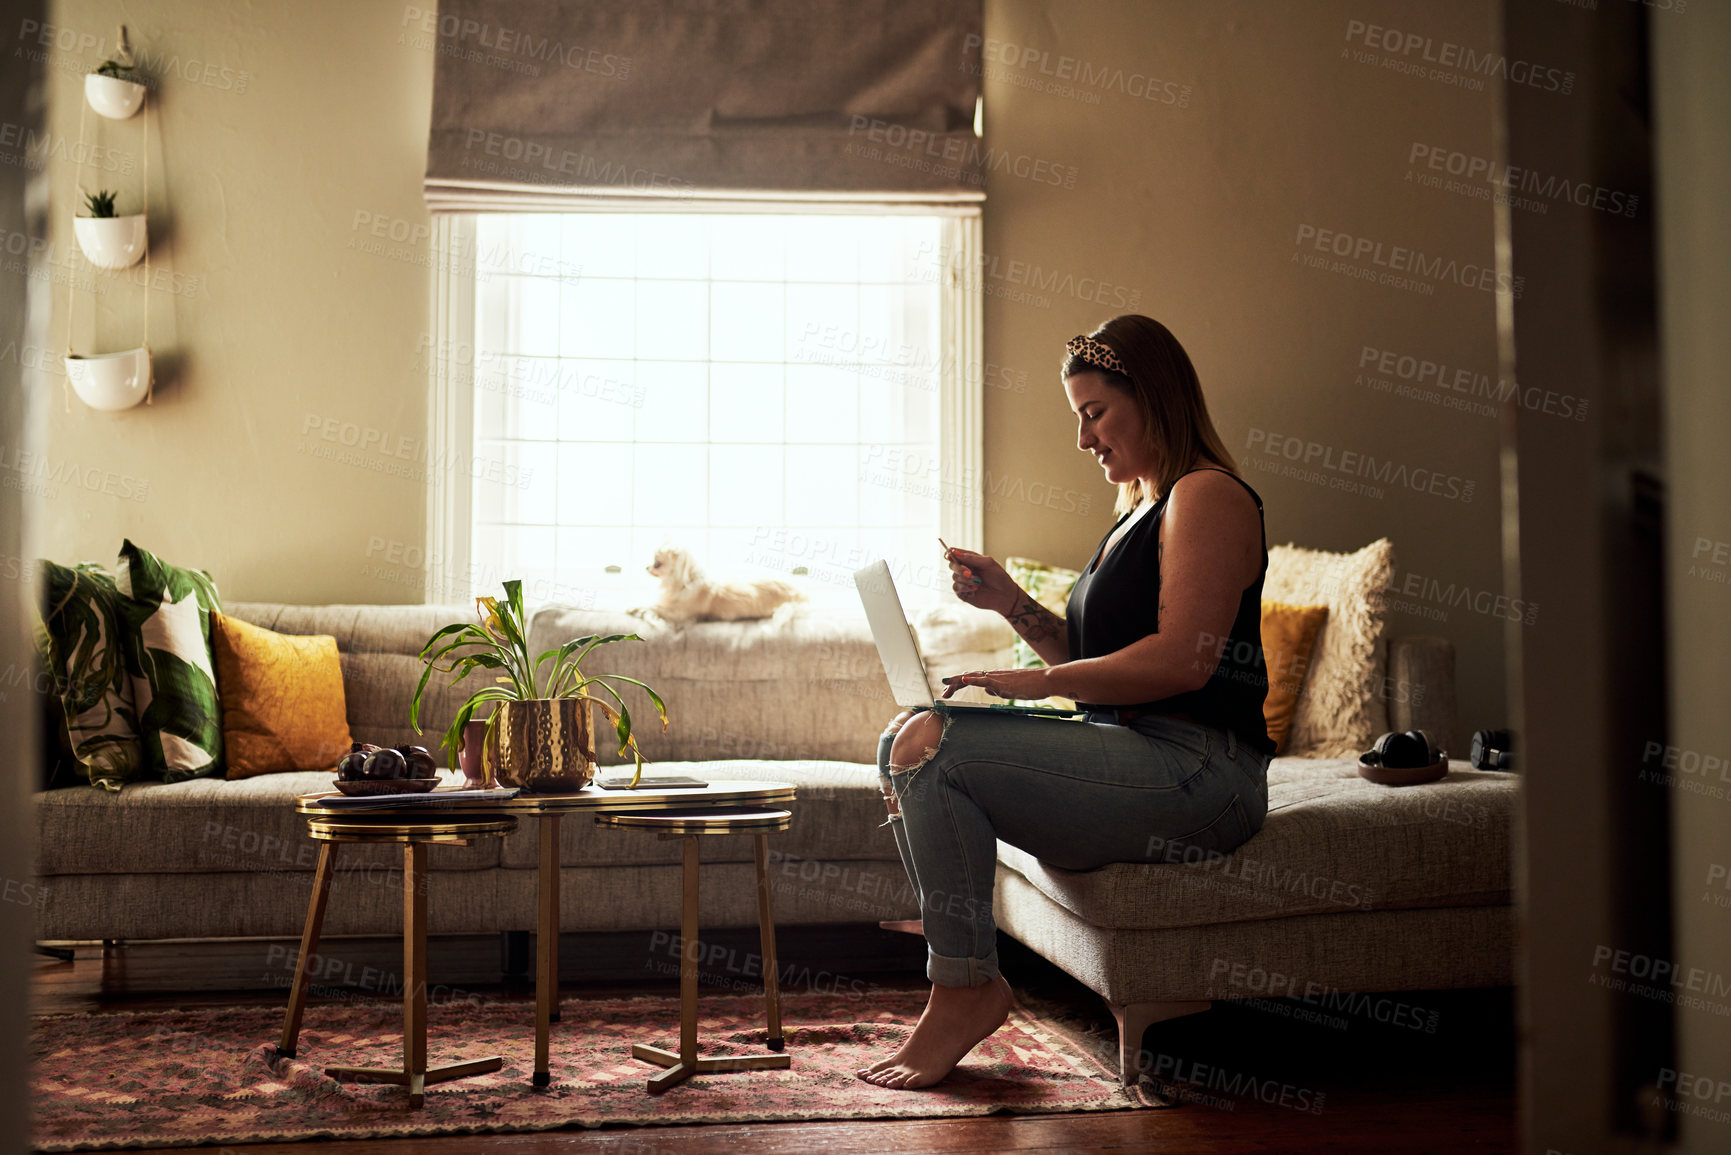 Buy stock photo Shot of a young woman using a laptop and credit card on the sofa at home